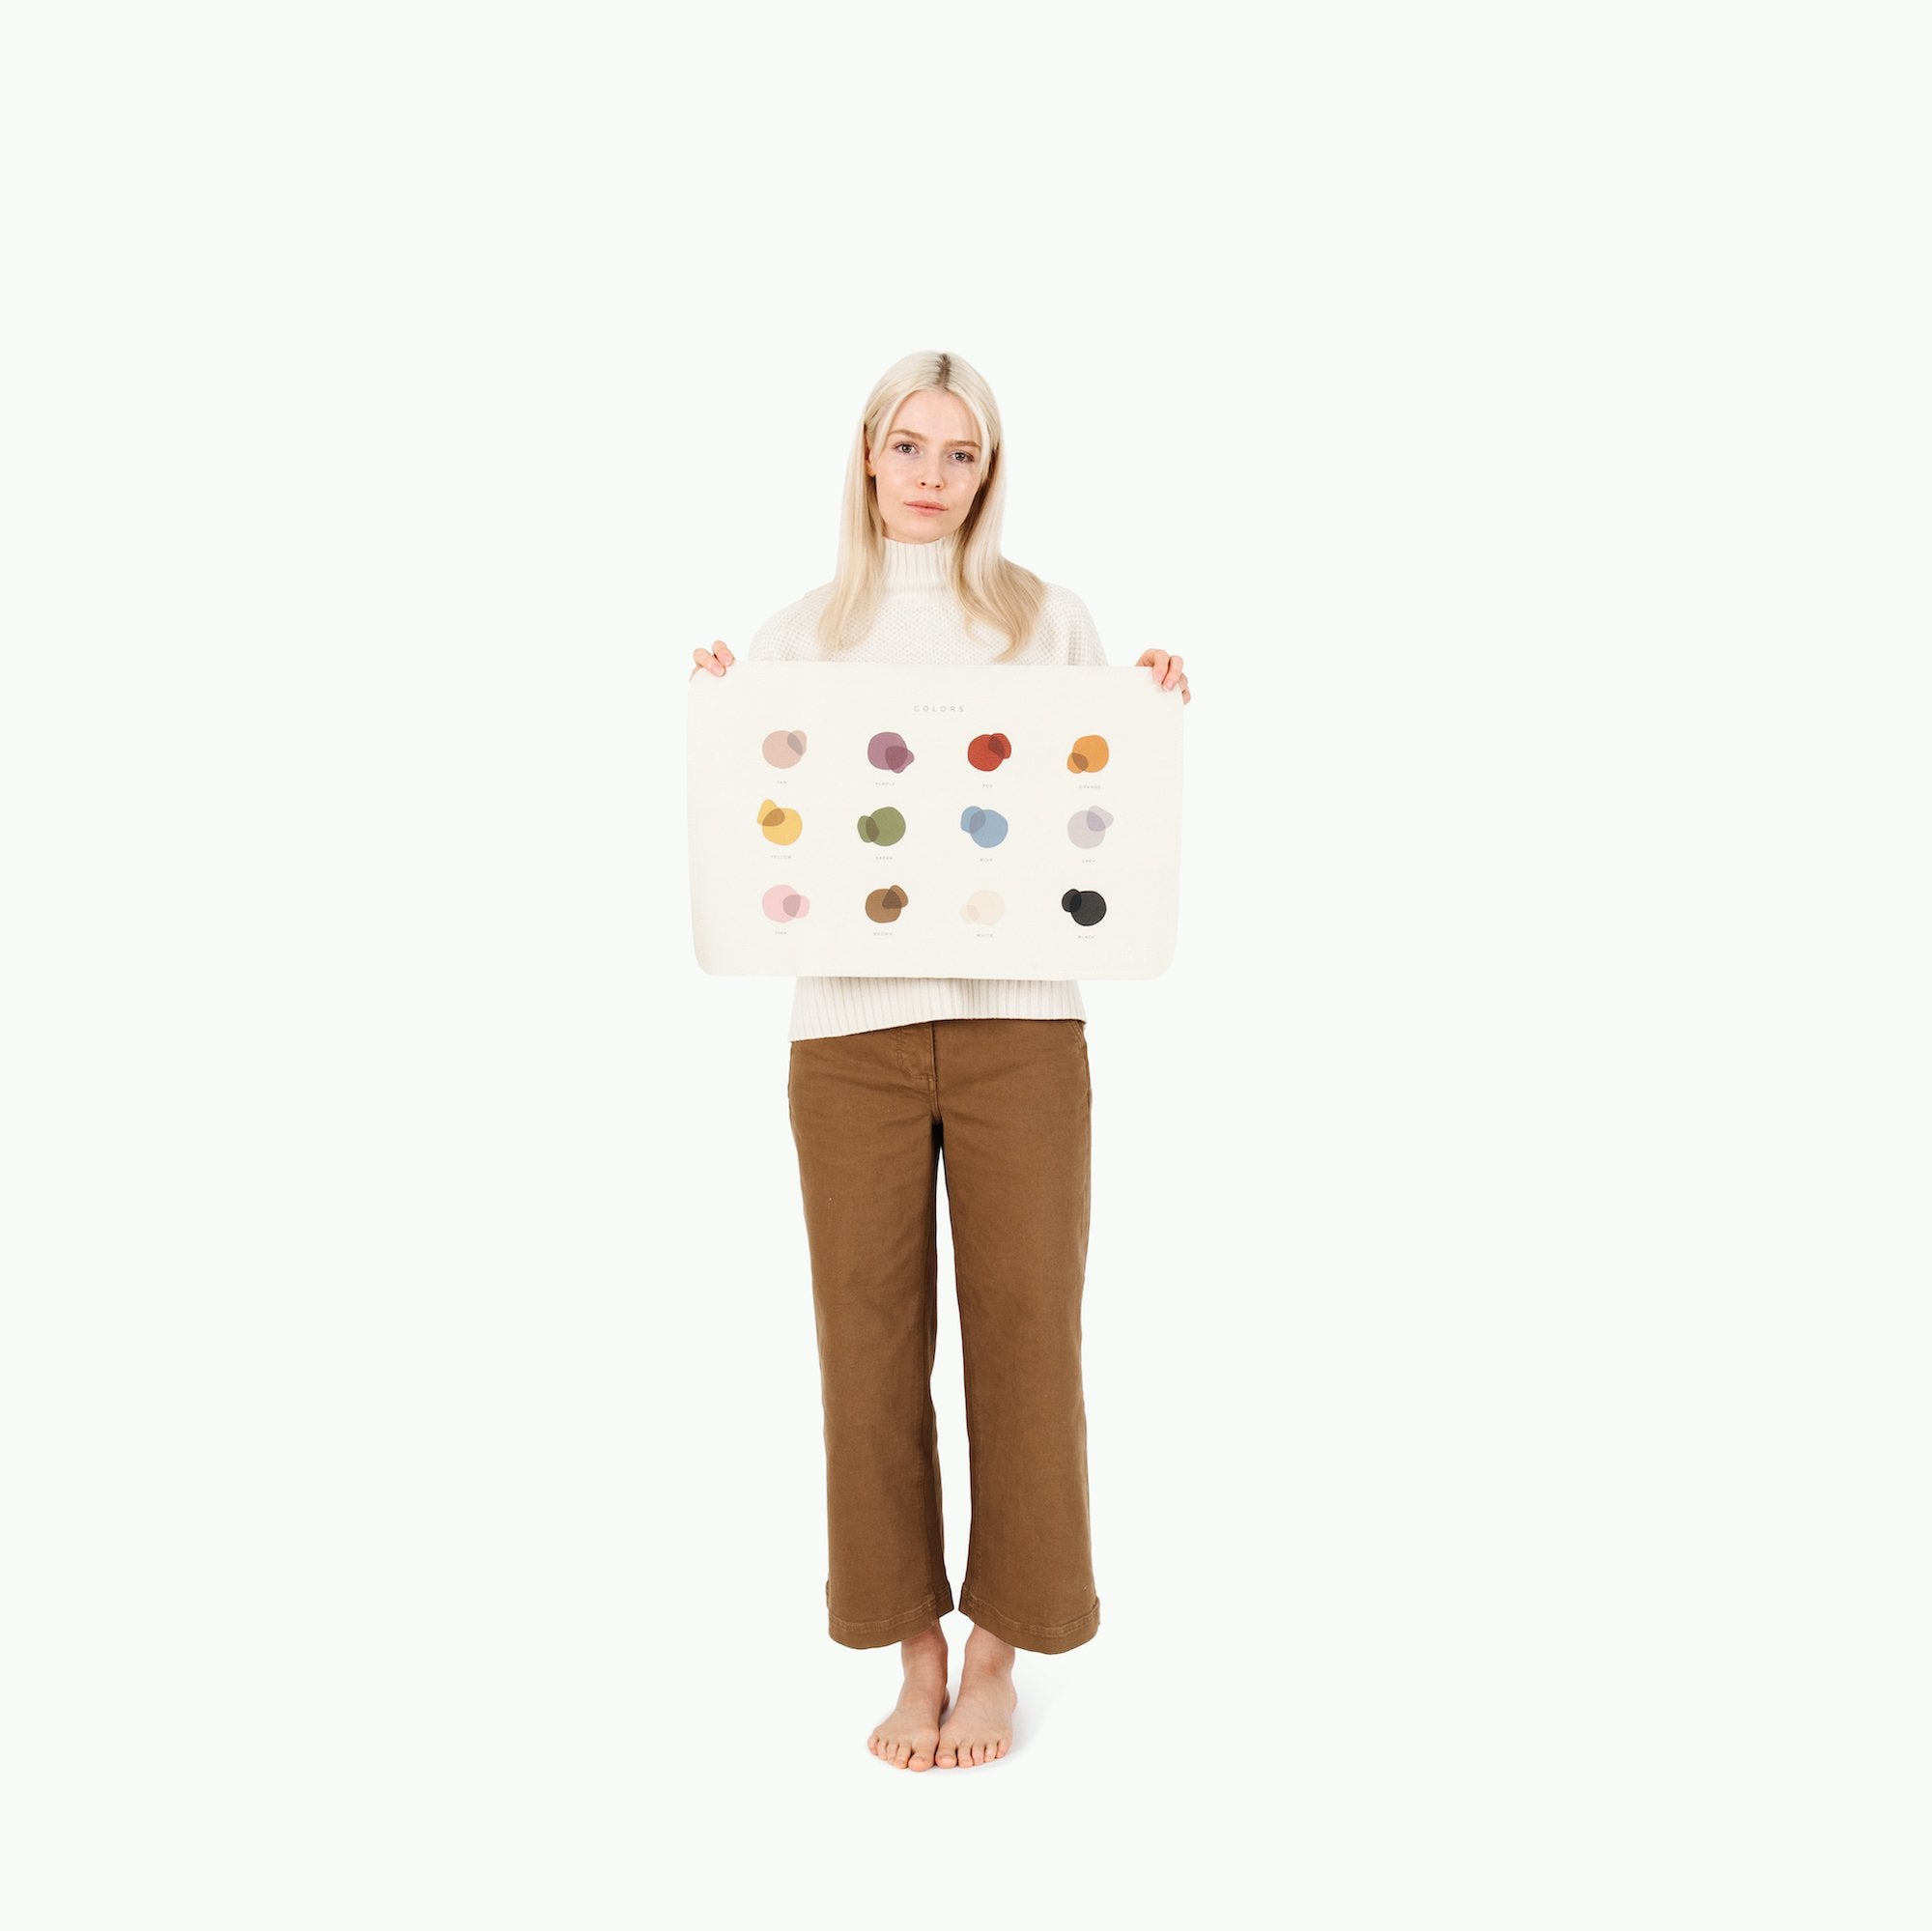 Colors (on sale)@Woman holding a Colors Micro mat